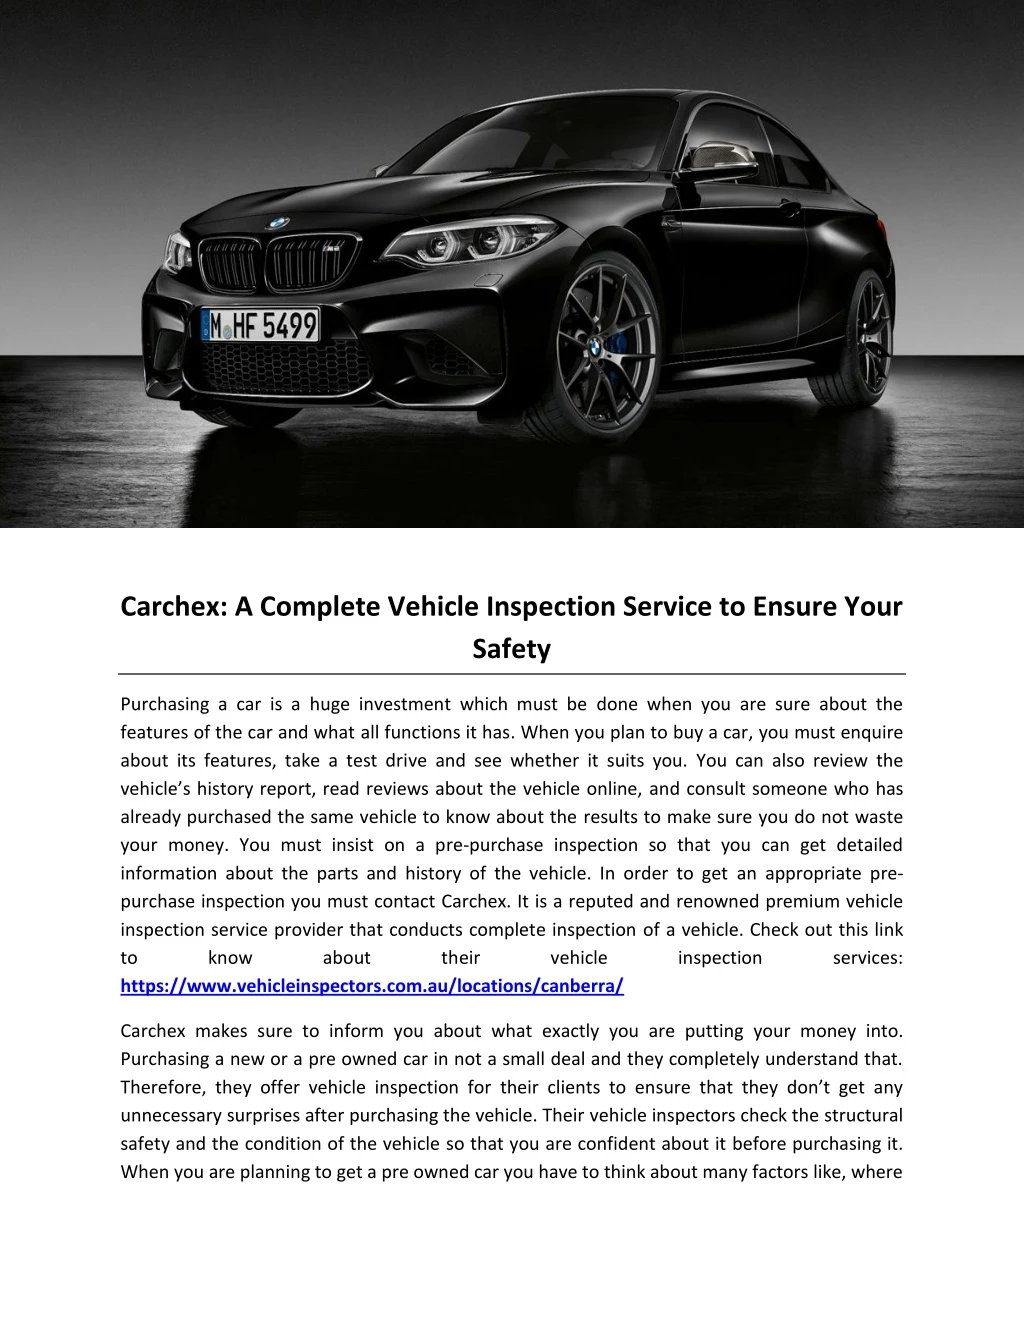 carchex a complete vehicle inspection service